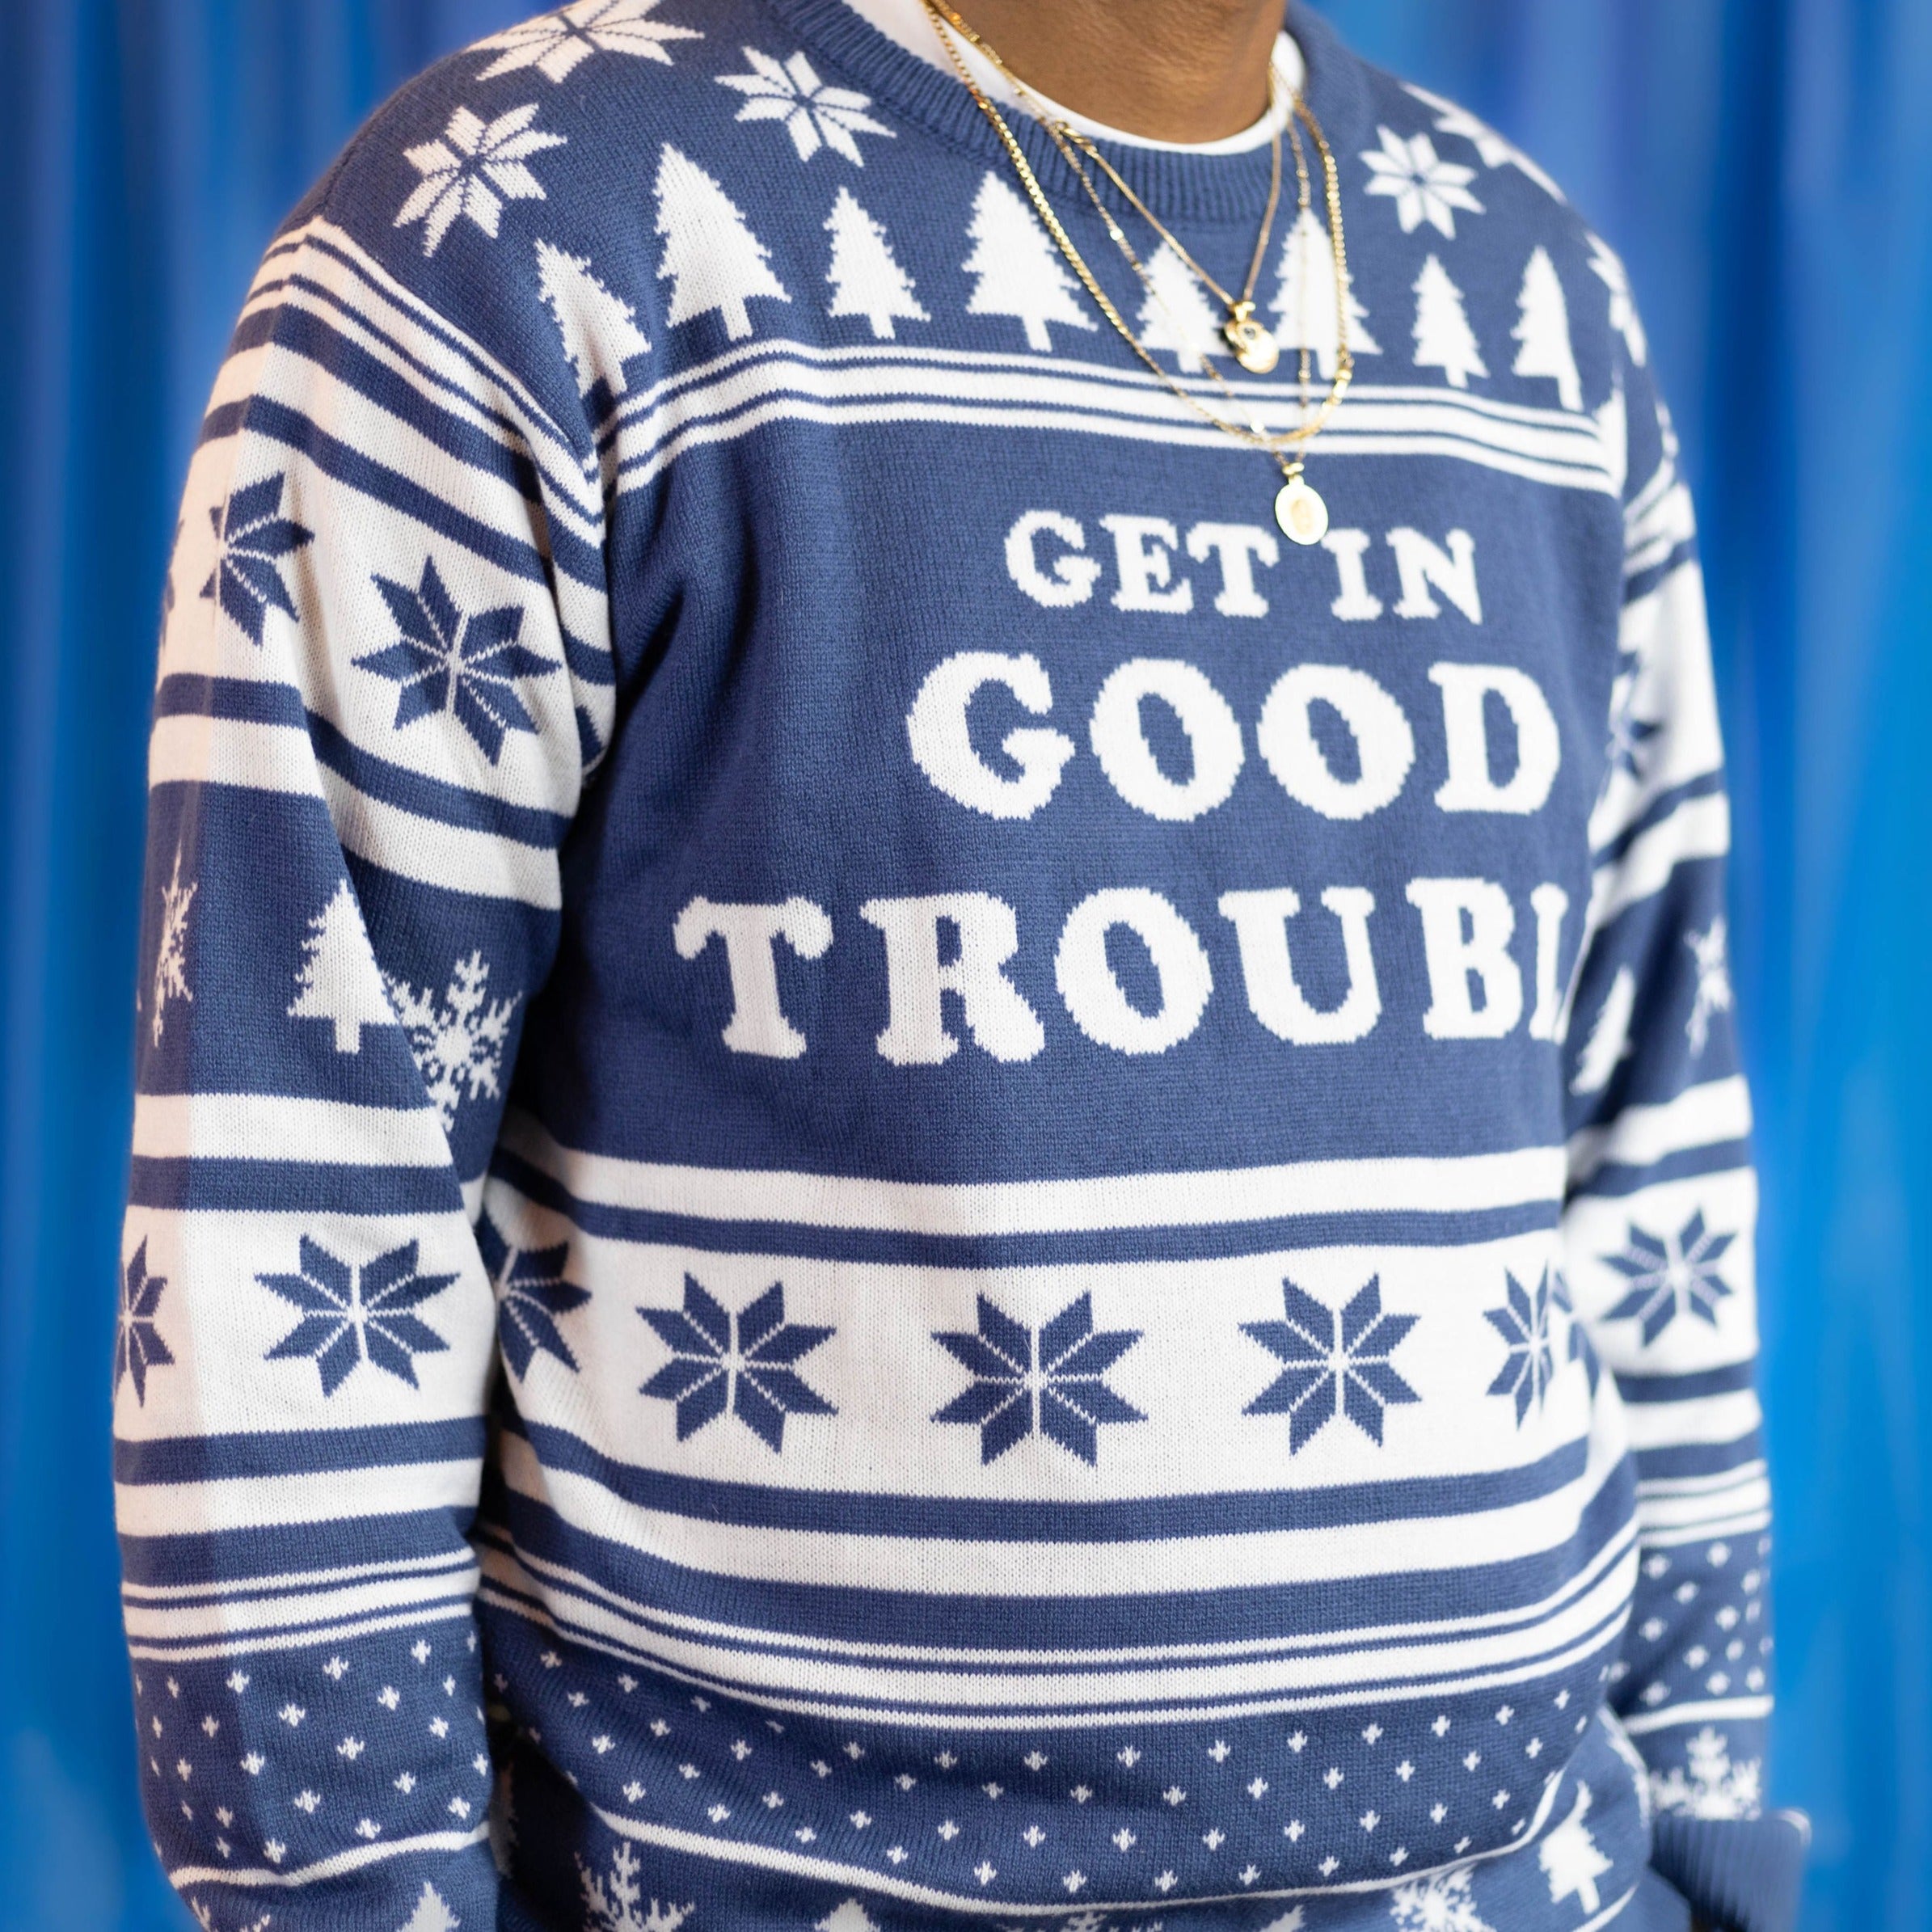 A person wearing the Get In Good Trouble Holiday Sweater. There is a blue background.